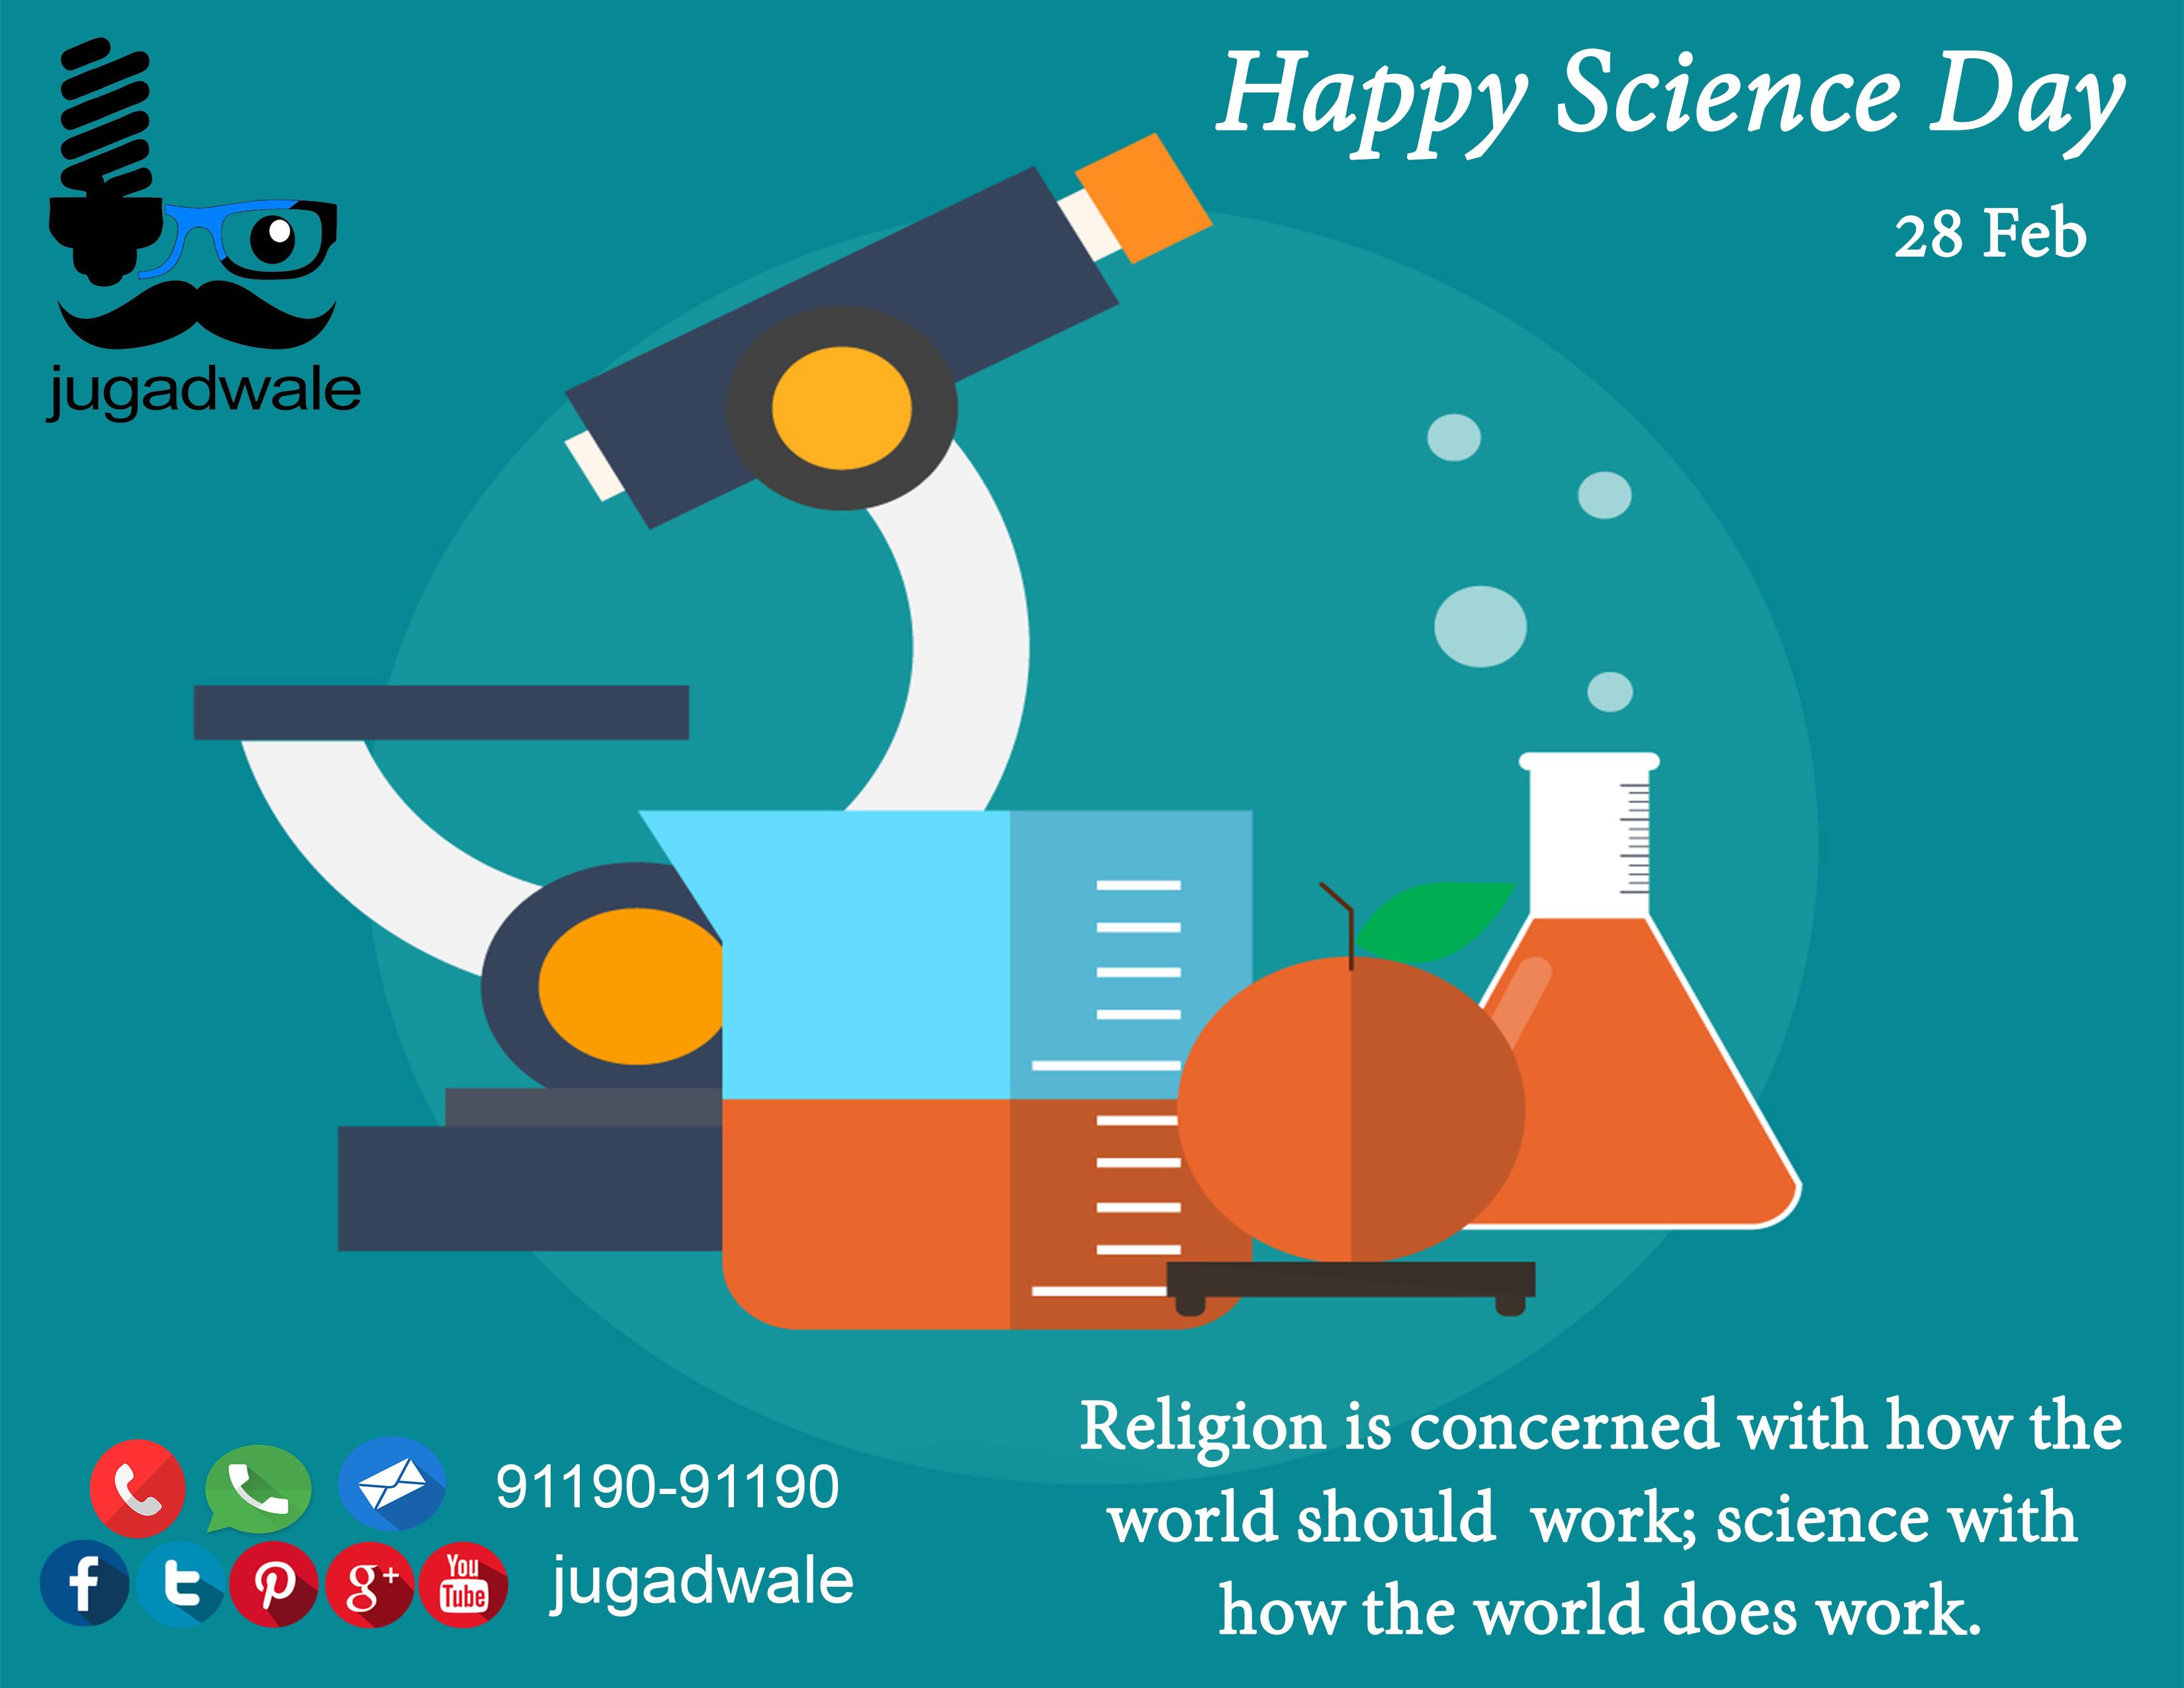 jugadwale wishes happy innovation for mankind on national science day # scienceday. National science day, Science, Knowledge